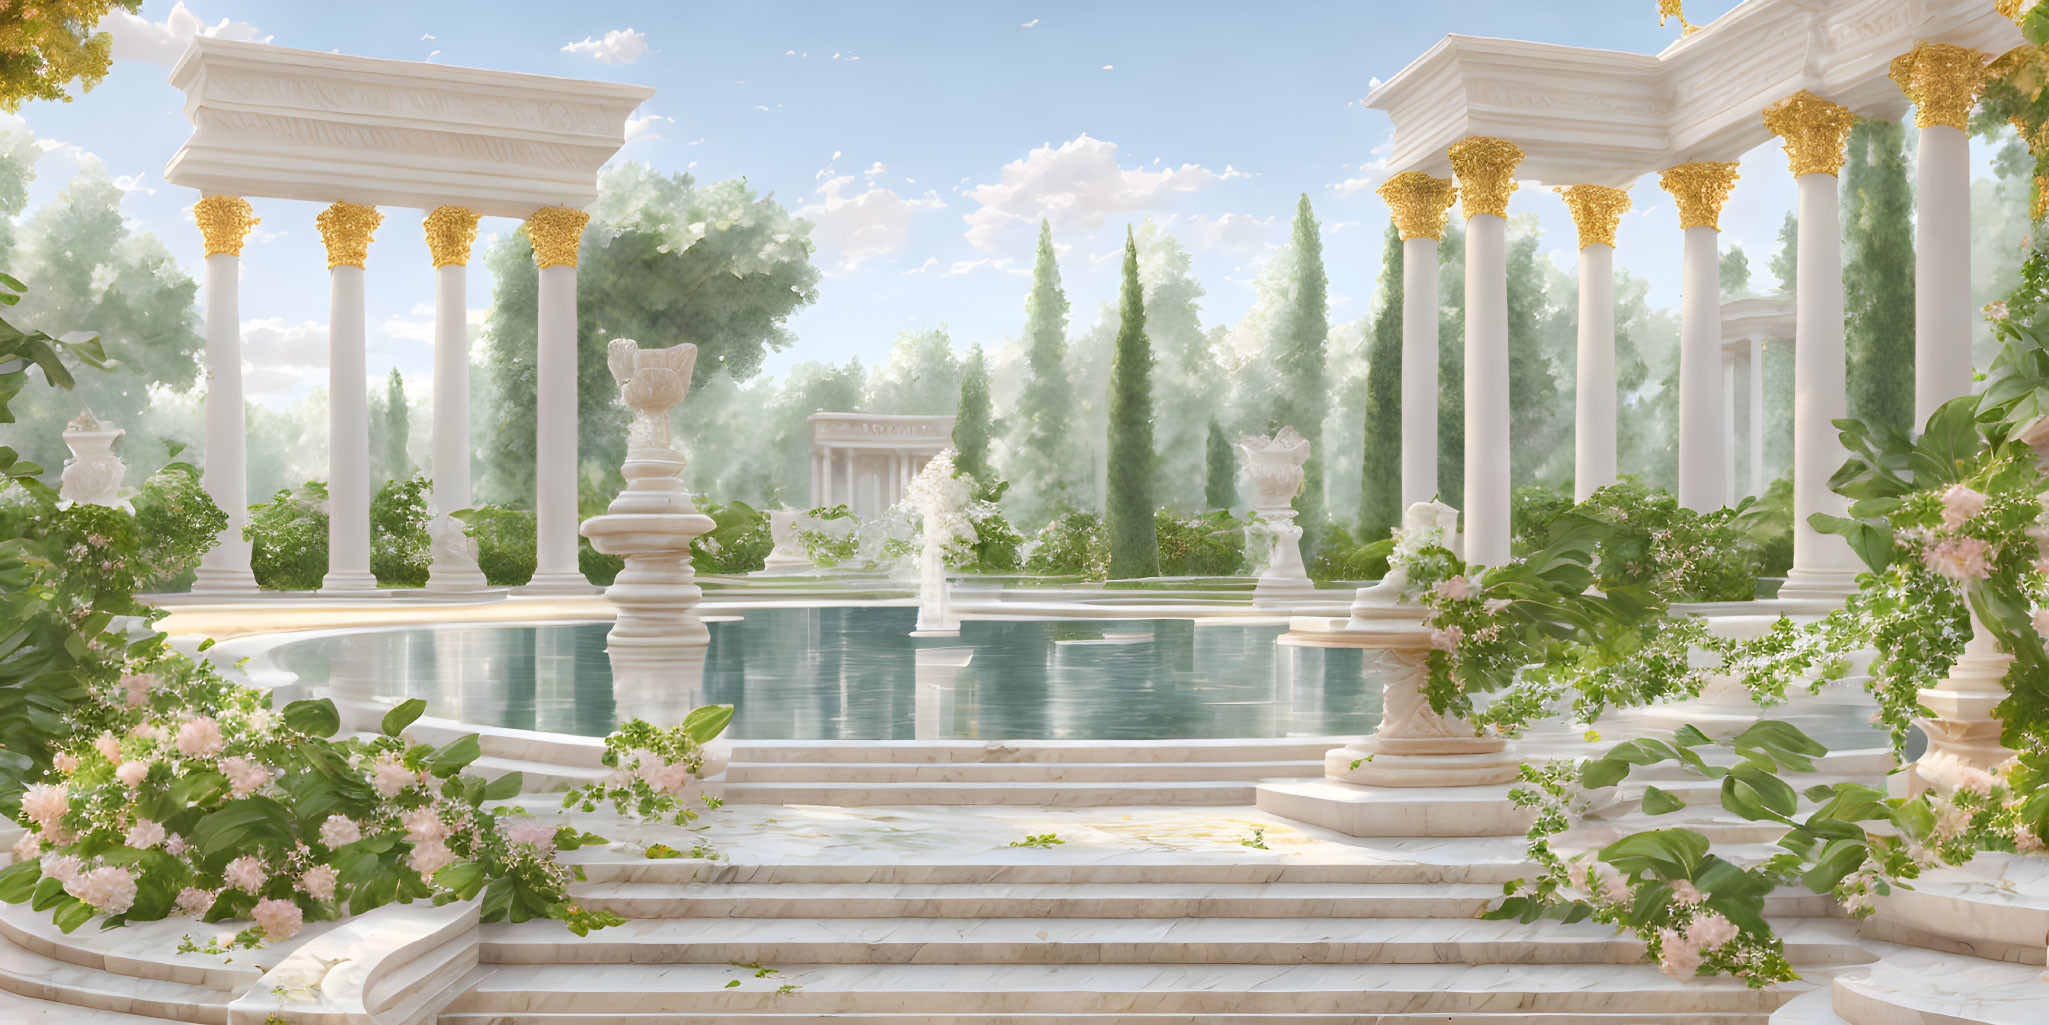 Classical garden with marble pillars, reflective pool, lush greenery, blooming flowers